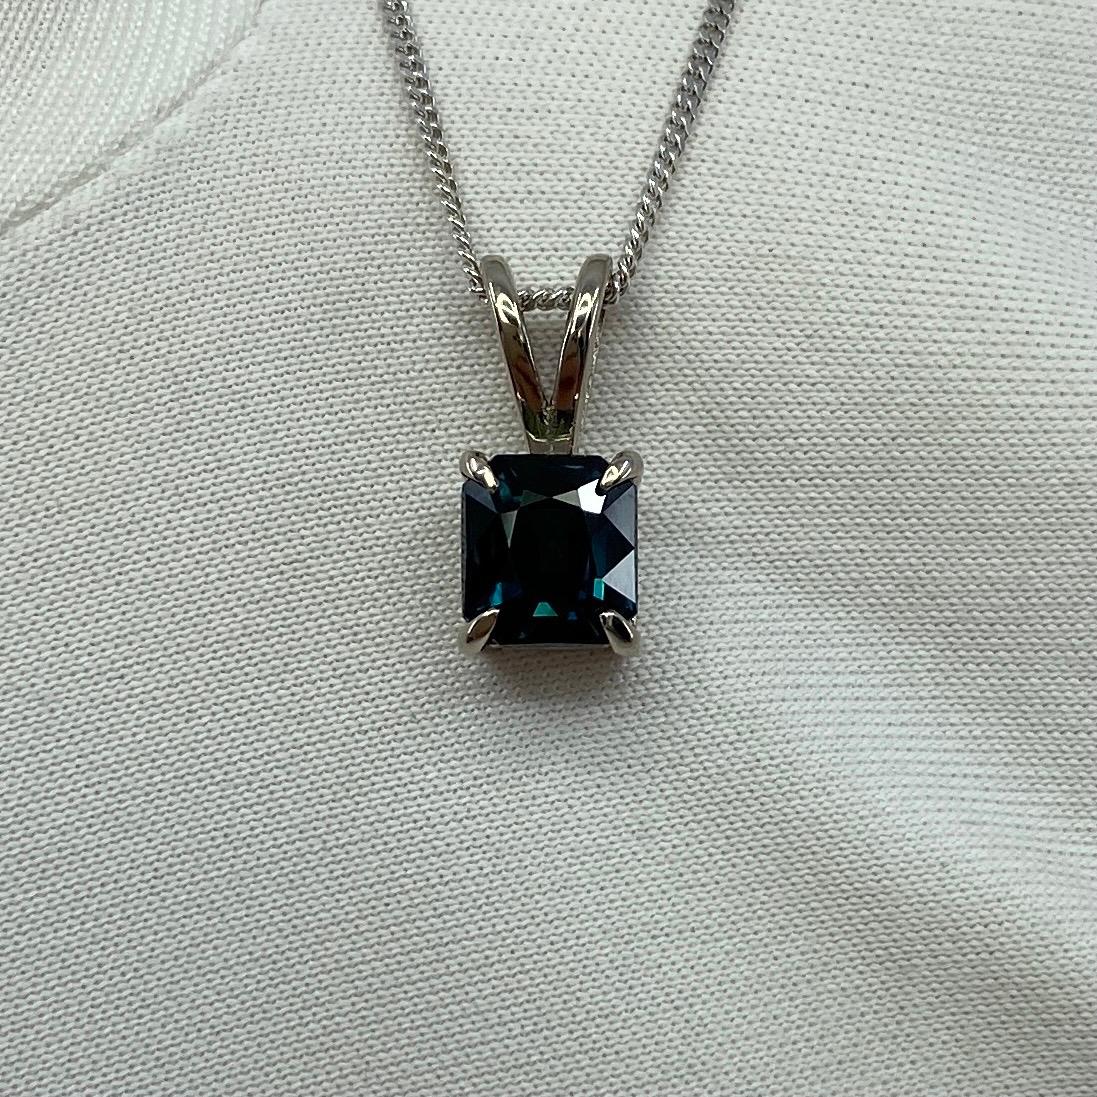 Octagon Cut 1.44ct IGI Certified Deep Teal Blue Untreated Sapphire 18k White Gold Pendant For Sale